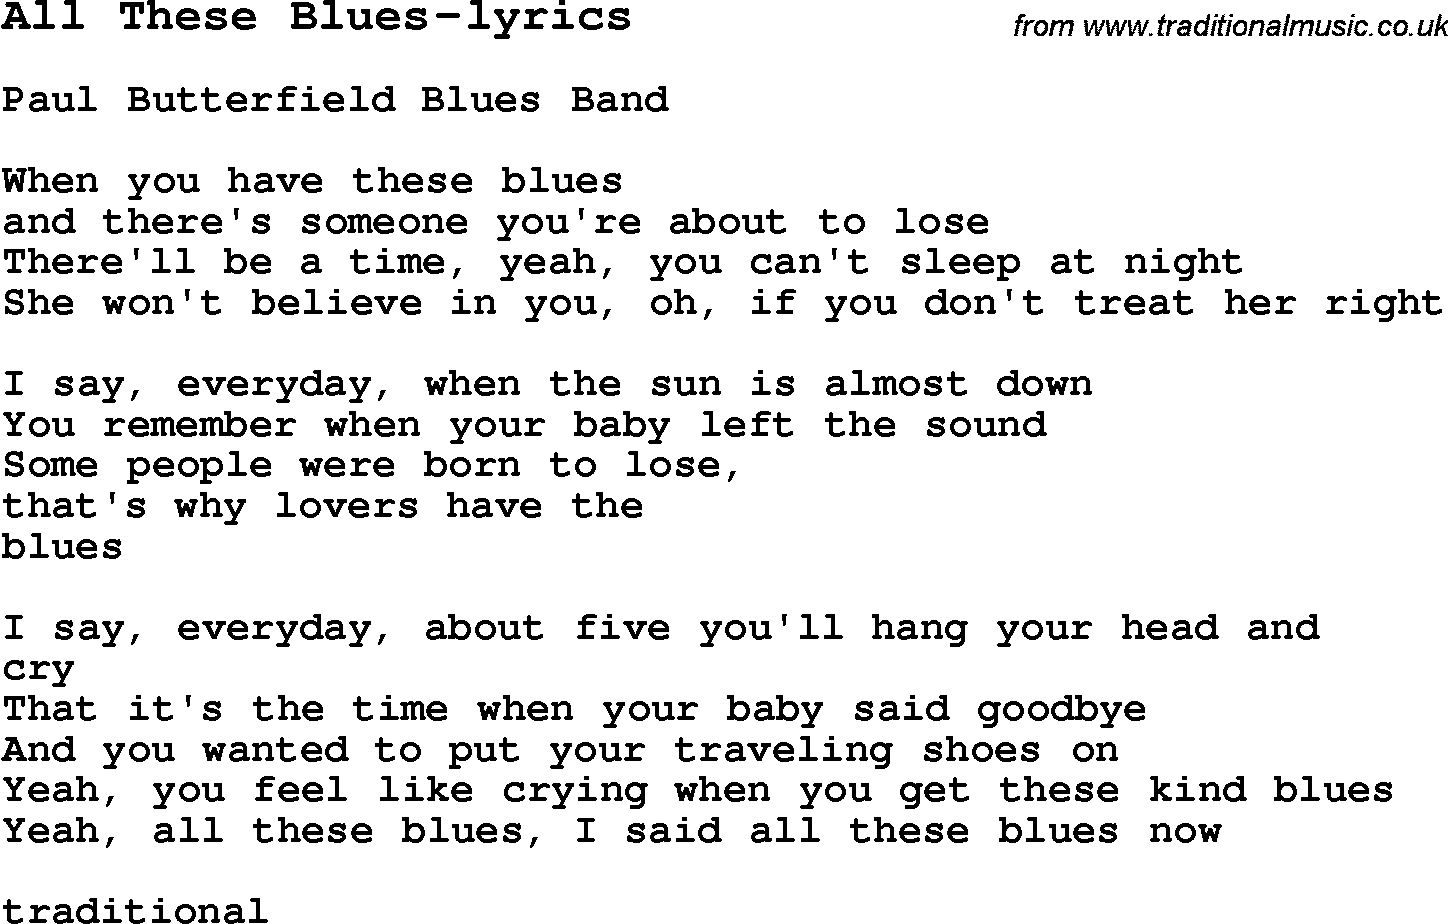 Blues Guitar Song, lyrics, chords, tablature, playing hints for All These Blues-lyrics